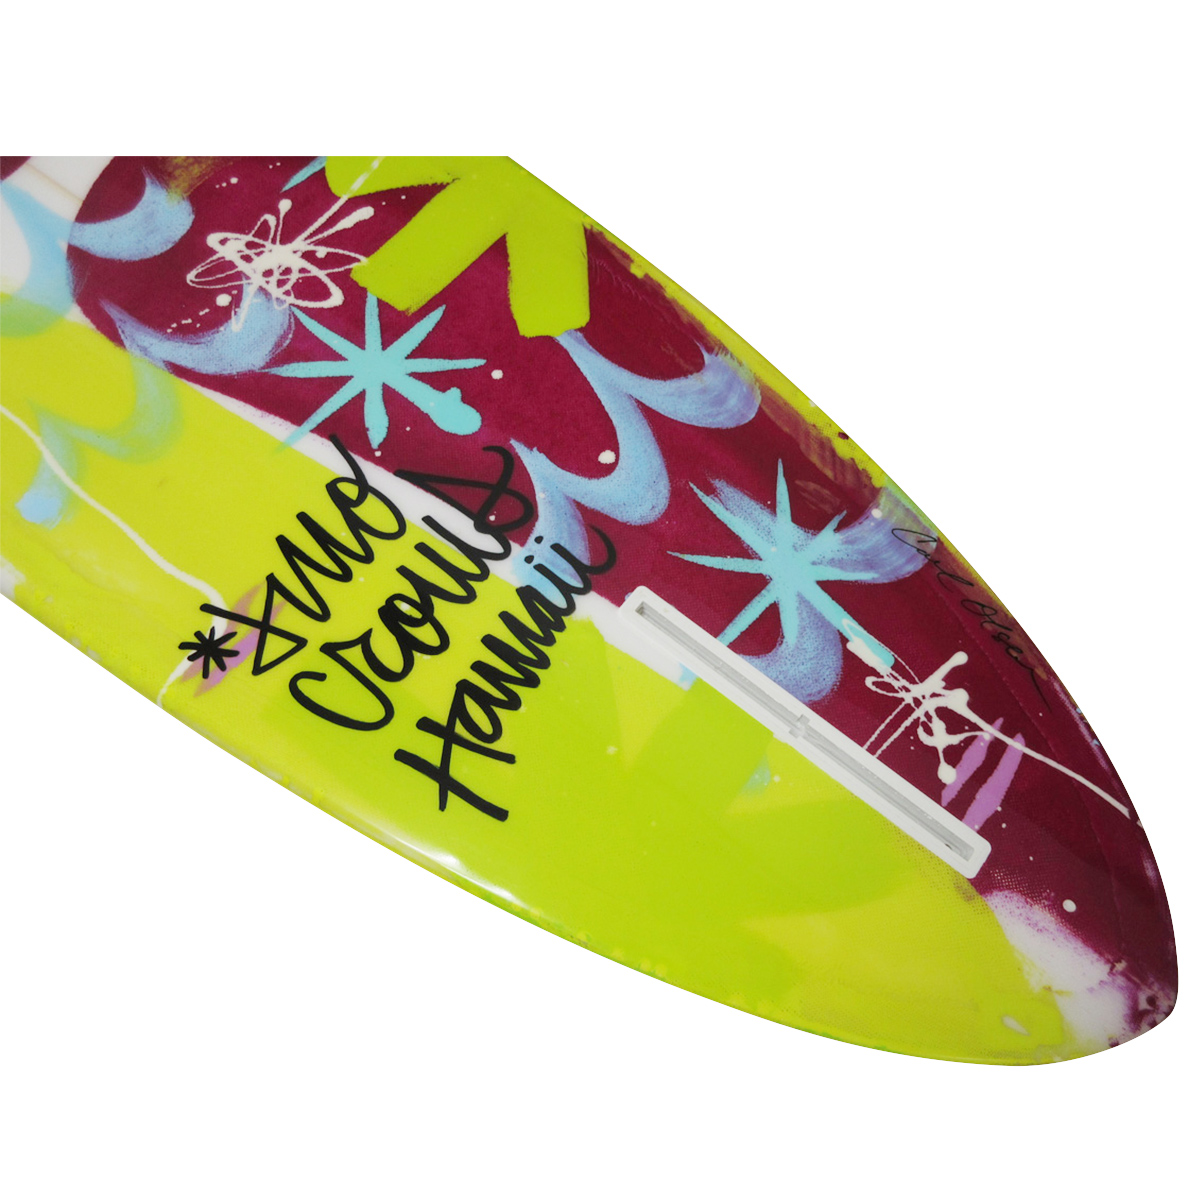 Two Crows Surfboards / Single Fin Mellow 5'9